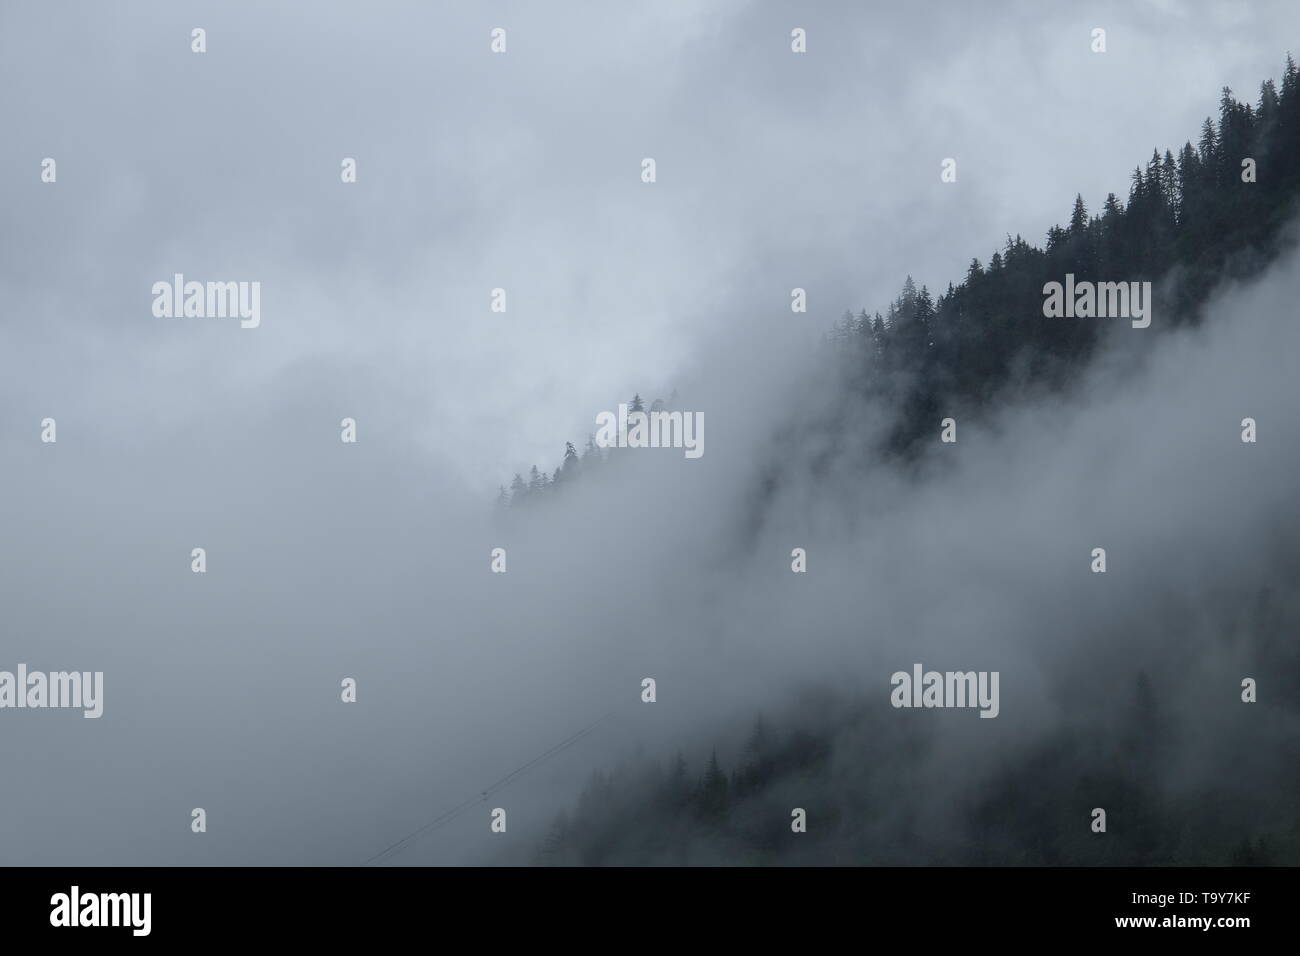 A Picture of Morning Mist in Juneau, AK Stock Photo